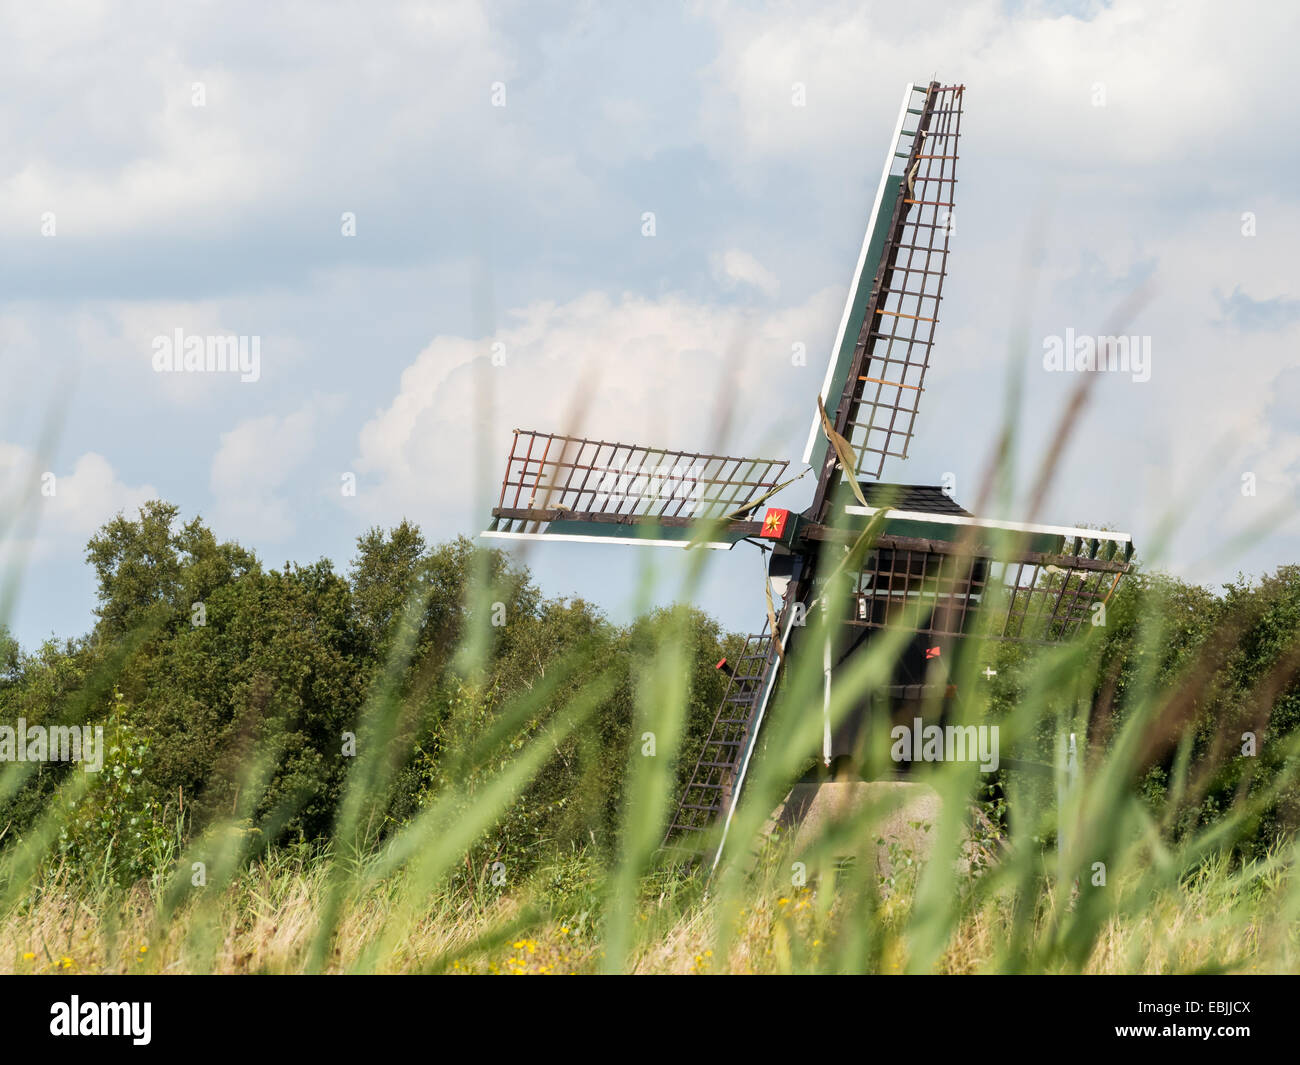 Dutch windmill pops out behind long strands of grass in Weerribben, Netherlands Stock Photo